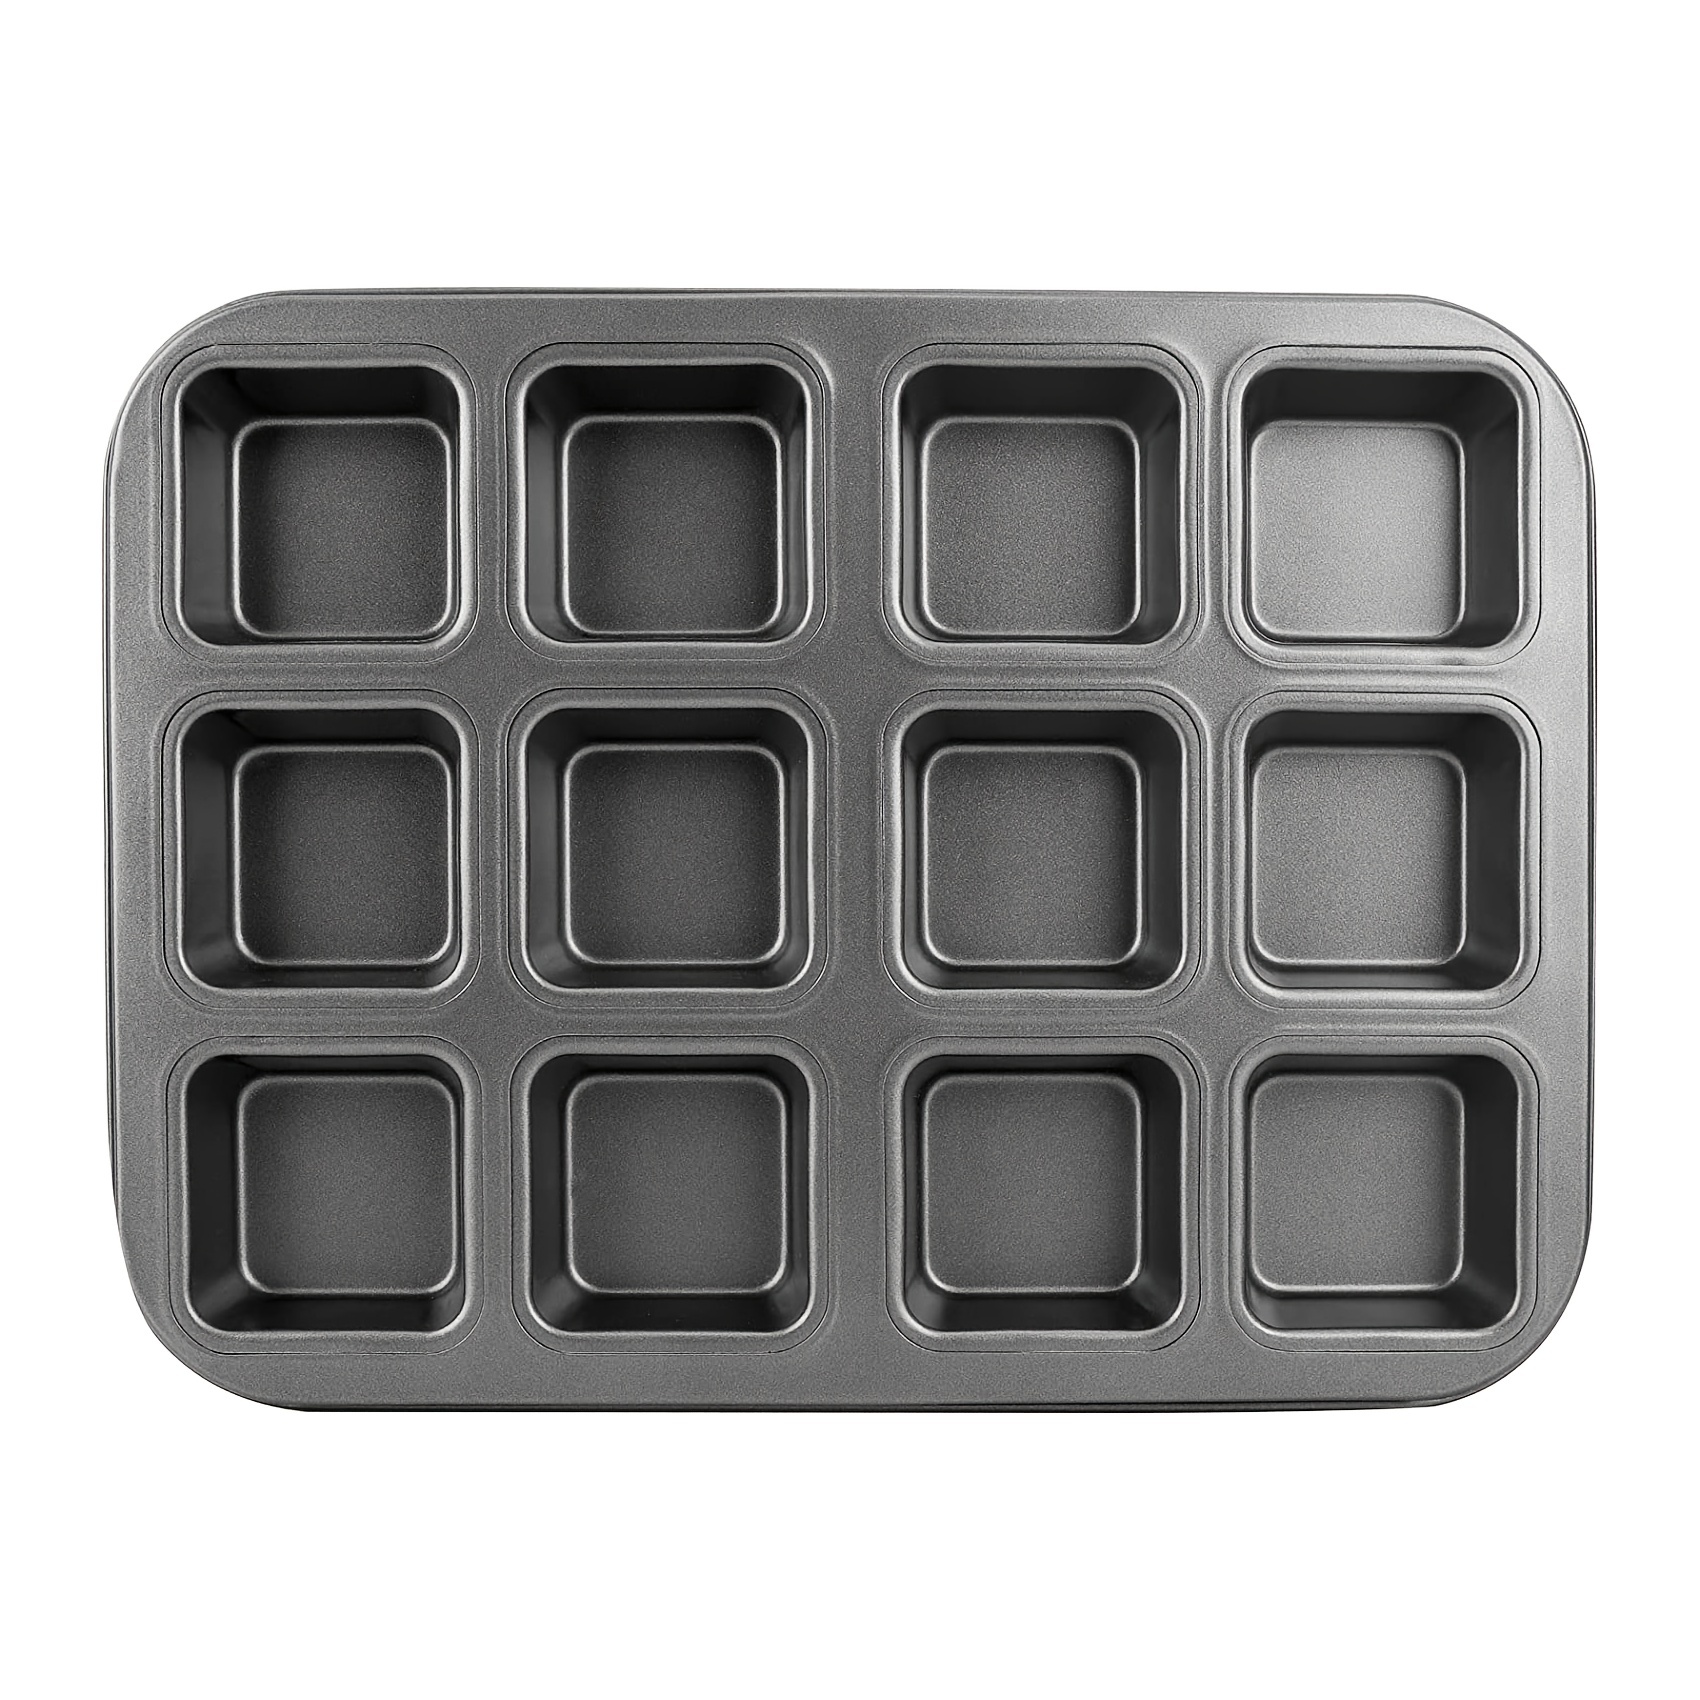 Eoonfirst Black Brownie Pan With Dividers, 1 Set 12 Square Cavity Mini Cake  Non Stick Baking